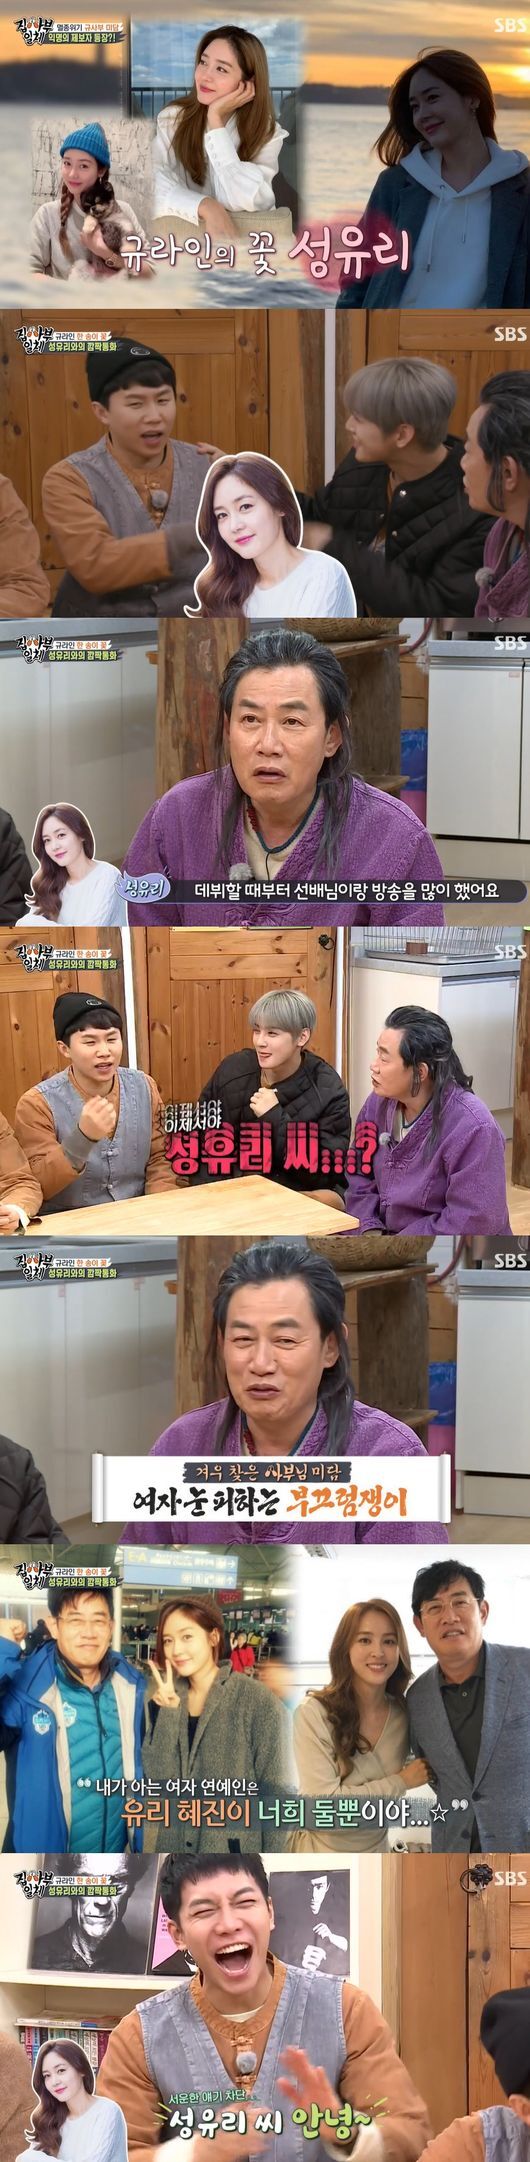 In All The Butlers, Sung Yu-ri laughed with an anecdote that Han Hye-jin and Stop Loss had been in the past, with Lee Kyung-kyus unspoken phone connection.Lee Kyung-kyu appeared on SBS entertainment All The Butlers broadcast on the 11th.On this day, Lee Kyung-kyu appeared as a master and made a telephone connection with Singer and Actor Sung Yu-ri, who conducted Healing Camp: One World together to listen to his misdemeanor.He introduced himself to his debut for more than 20 years, but Lee Kyung-kyu did not notice Baro when he heard his voice.So Sung Yu-ri said, I was with him for about two years. Lee Kyung-kyu heard a laugh and noticed Sung Yu-ri as Baro.I asked Sung Yu-ri about Lee Kyung-kyus mist.Sung Yu-ri is a softie inside, a girl guest or MC, who can not see the eyes well, and runs away when he approaches. Yang Se-hyeong asked, Is that a misdemeanor? Sung Yu-ri replied, Yes.I asked him what he was sorry about.Sung Yu-ri said, I used to have a Healing Camp with Han Hye-jin: One World and only two numbers that I know female entertainers. After that, I did not know who Sung Yu-ri was when I entered Kim Min-jung and entertained.When I tried to hang up the phone, Sung Yu-ri said, Please tell me you love me. Lee Kyung-kyu said, I love you.All The Butlers broadcast screen capture